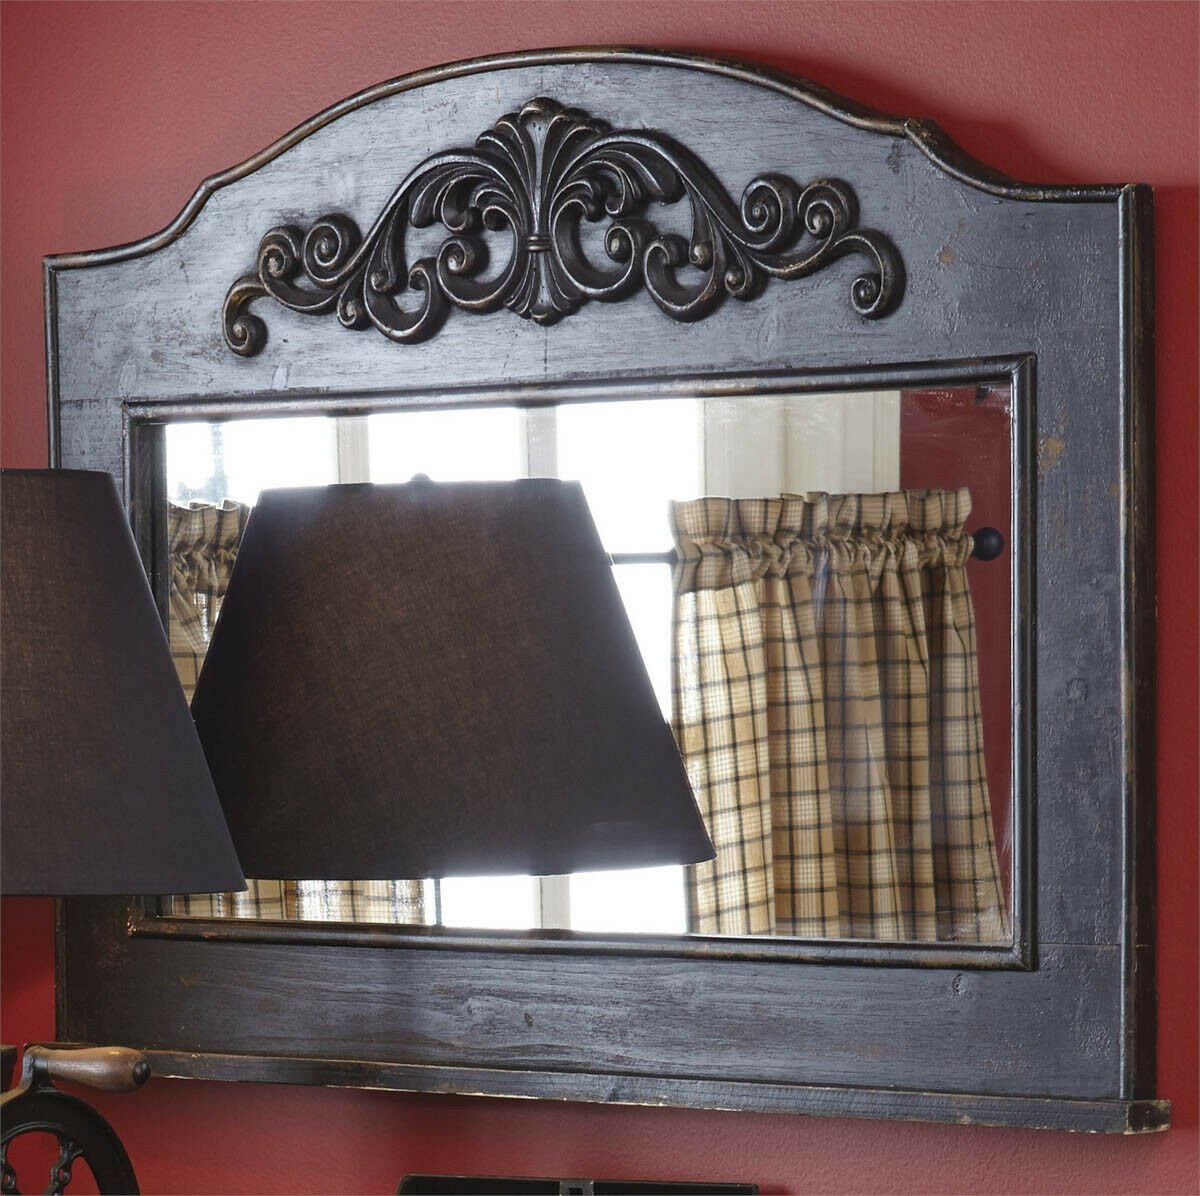 Primitive/Country Distressed Black Mantle Mirror Farmhouse - The Primitive Pineapple Collection